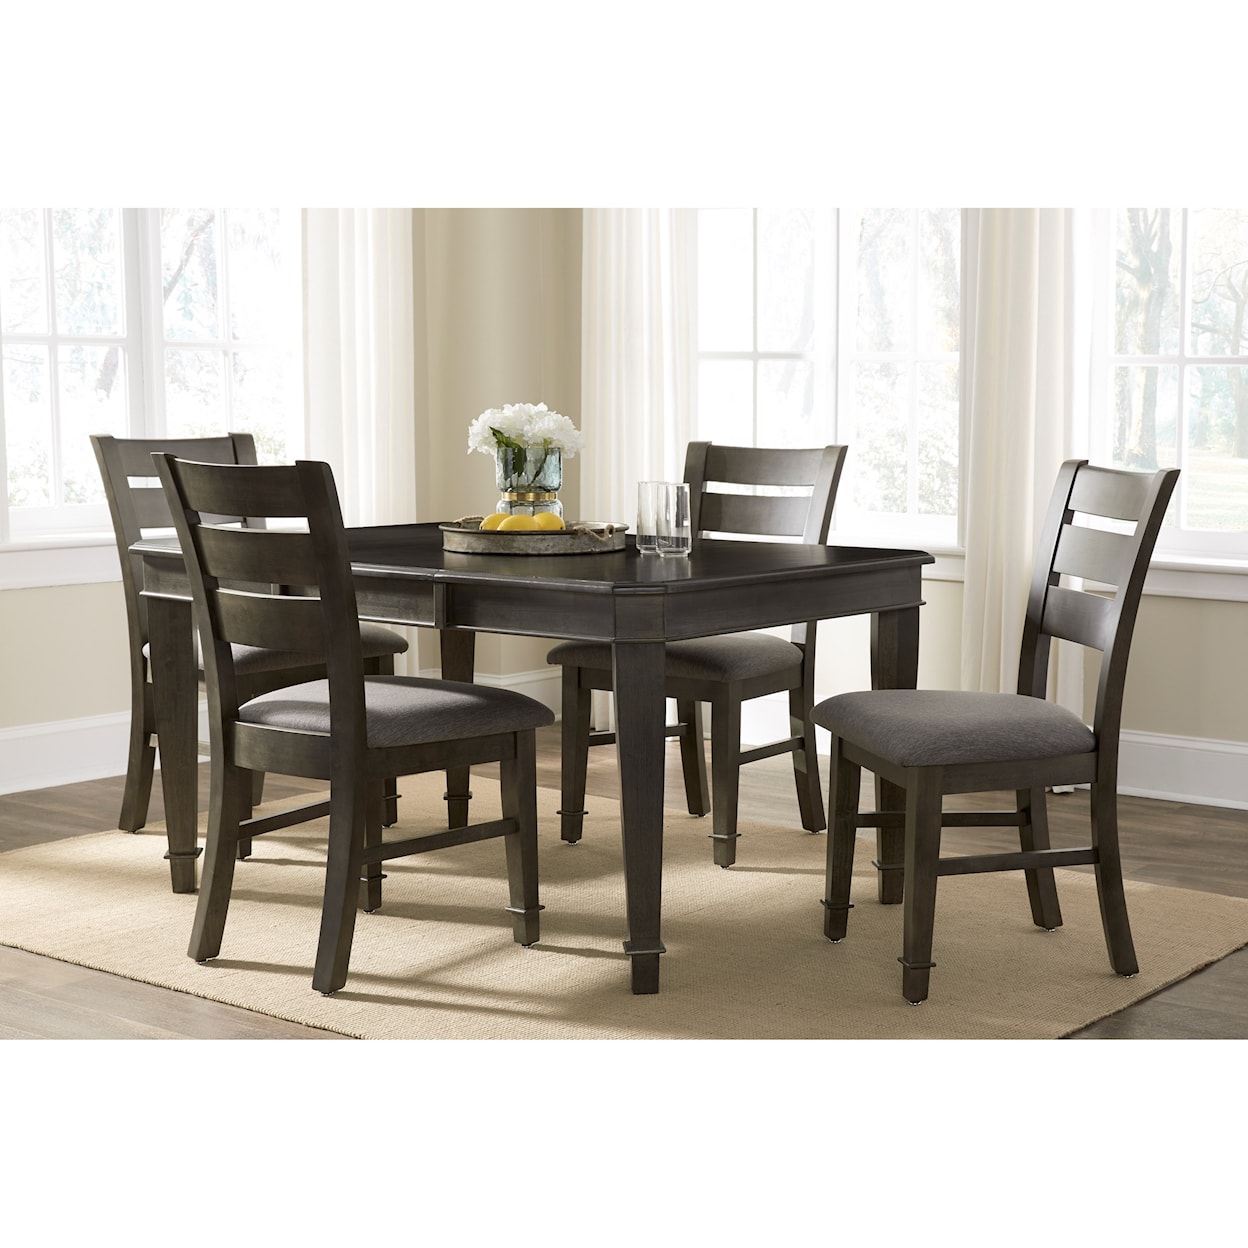 John Thomas SELECT Dining Room 5-Piece Table and Chair Set